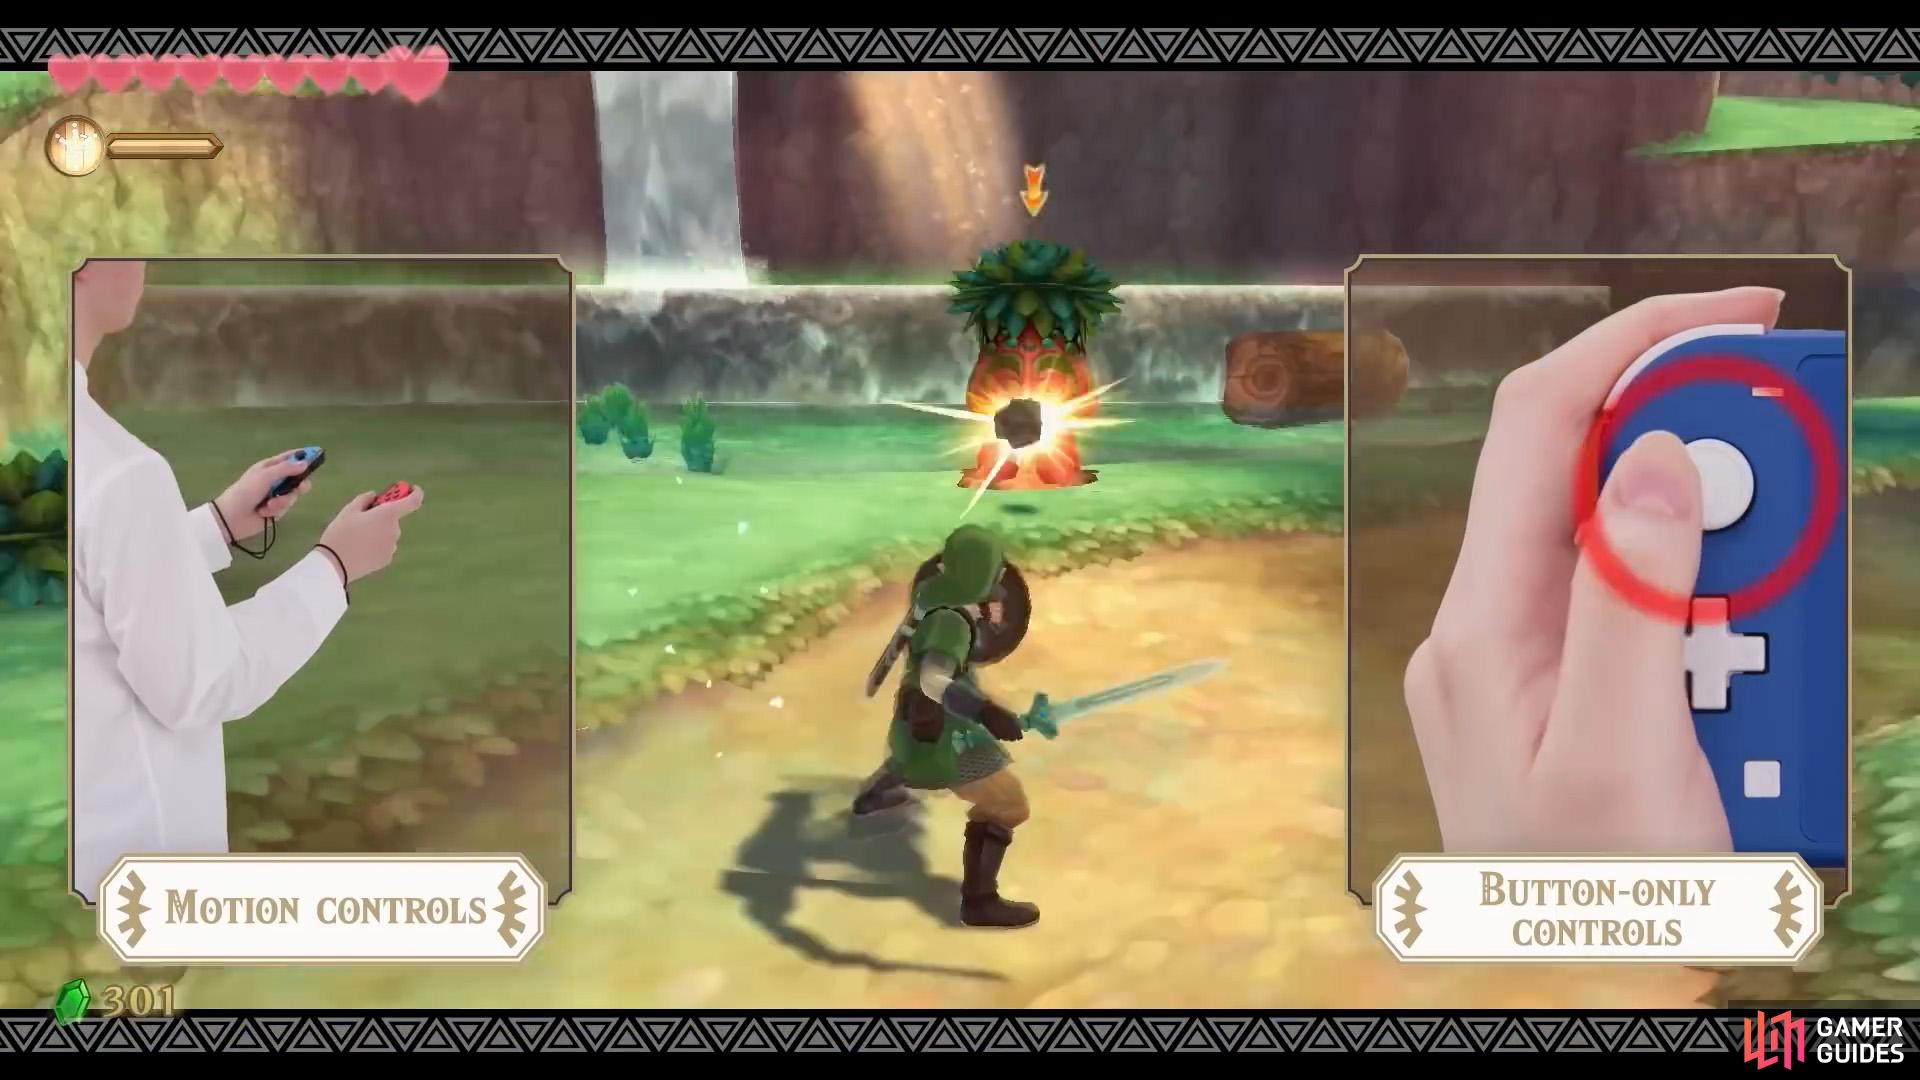 Pushing the left stick inwards will raise Link's shield (instead of waggling the nunchuck).